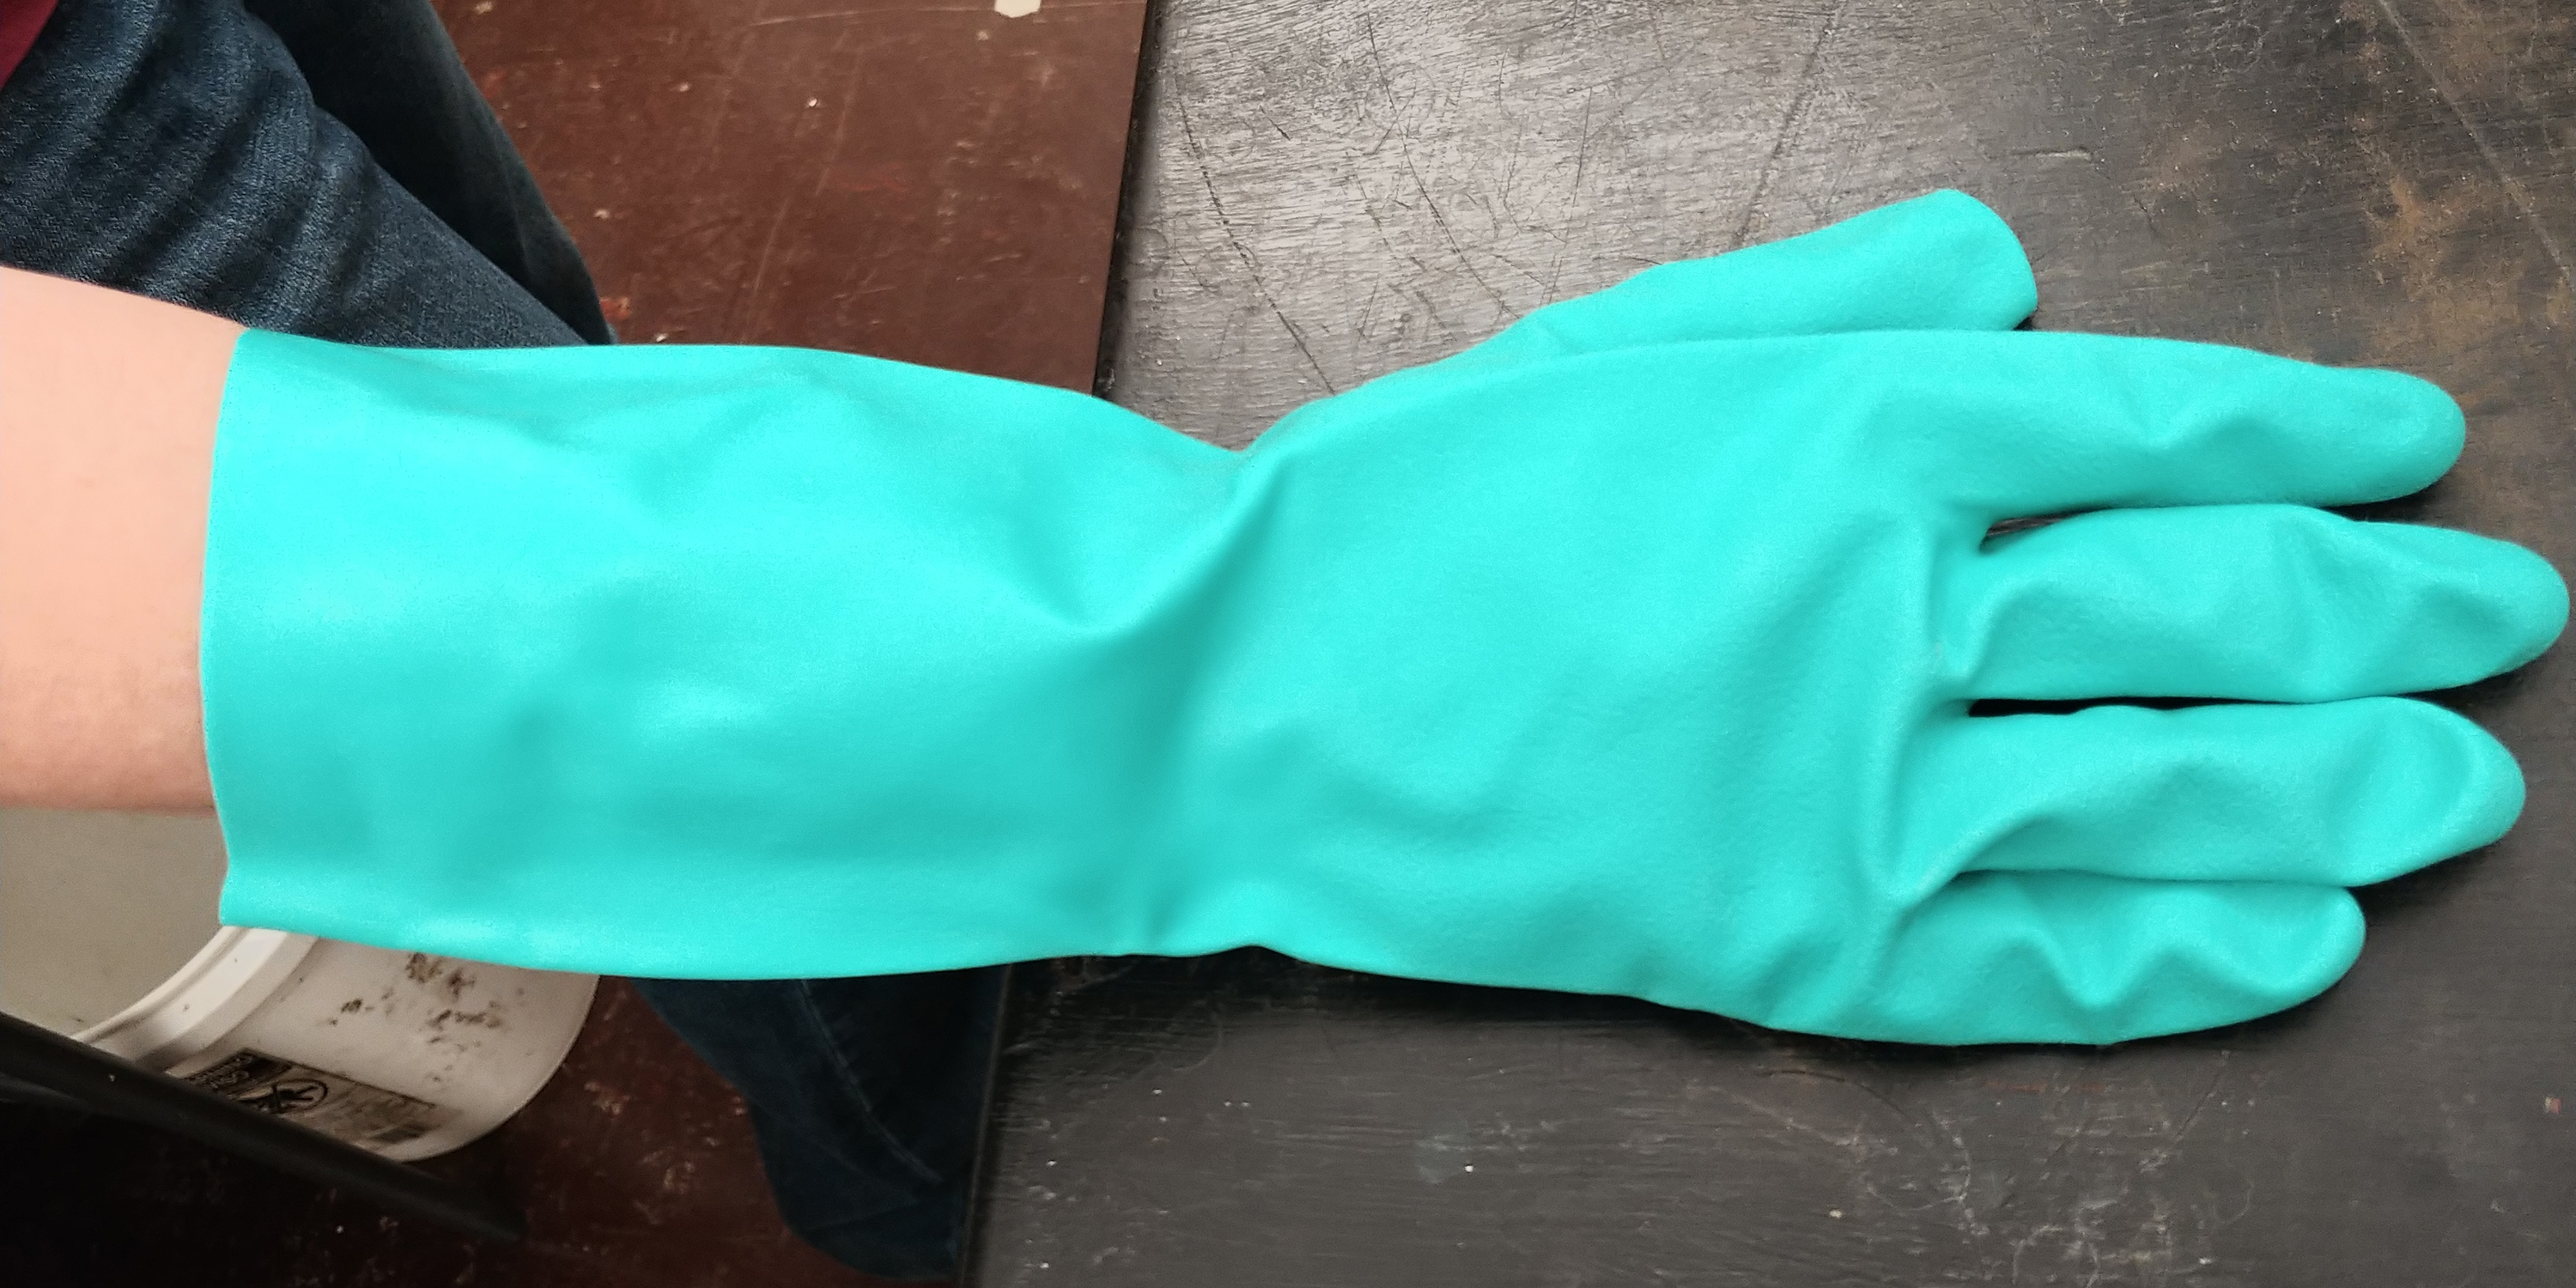 Blue-green glove made out of nitrile material.